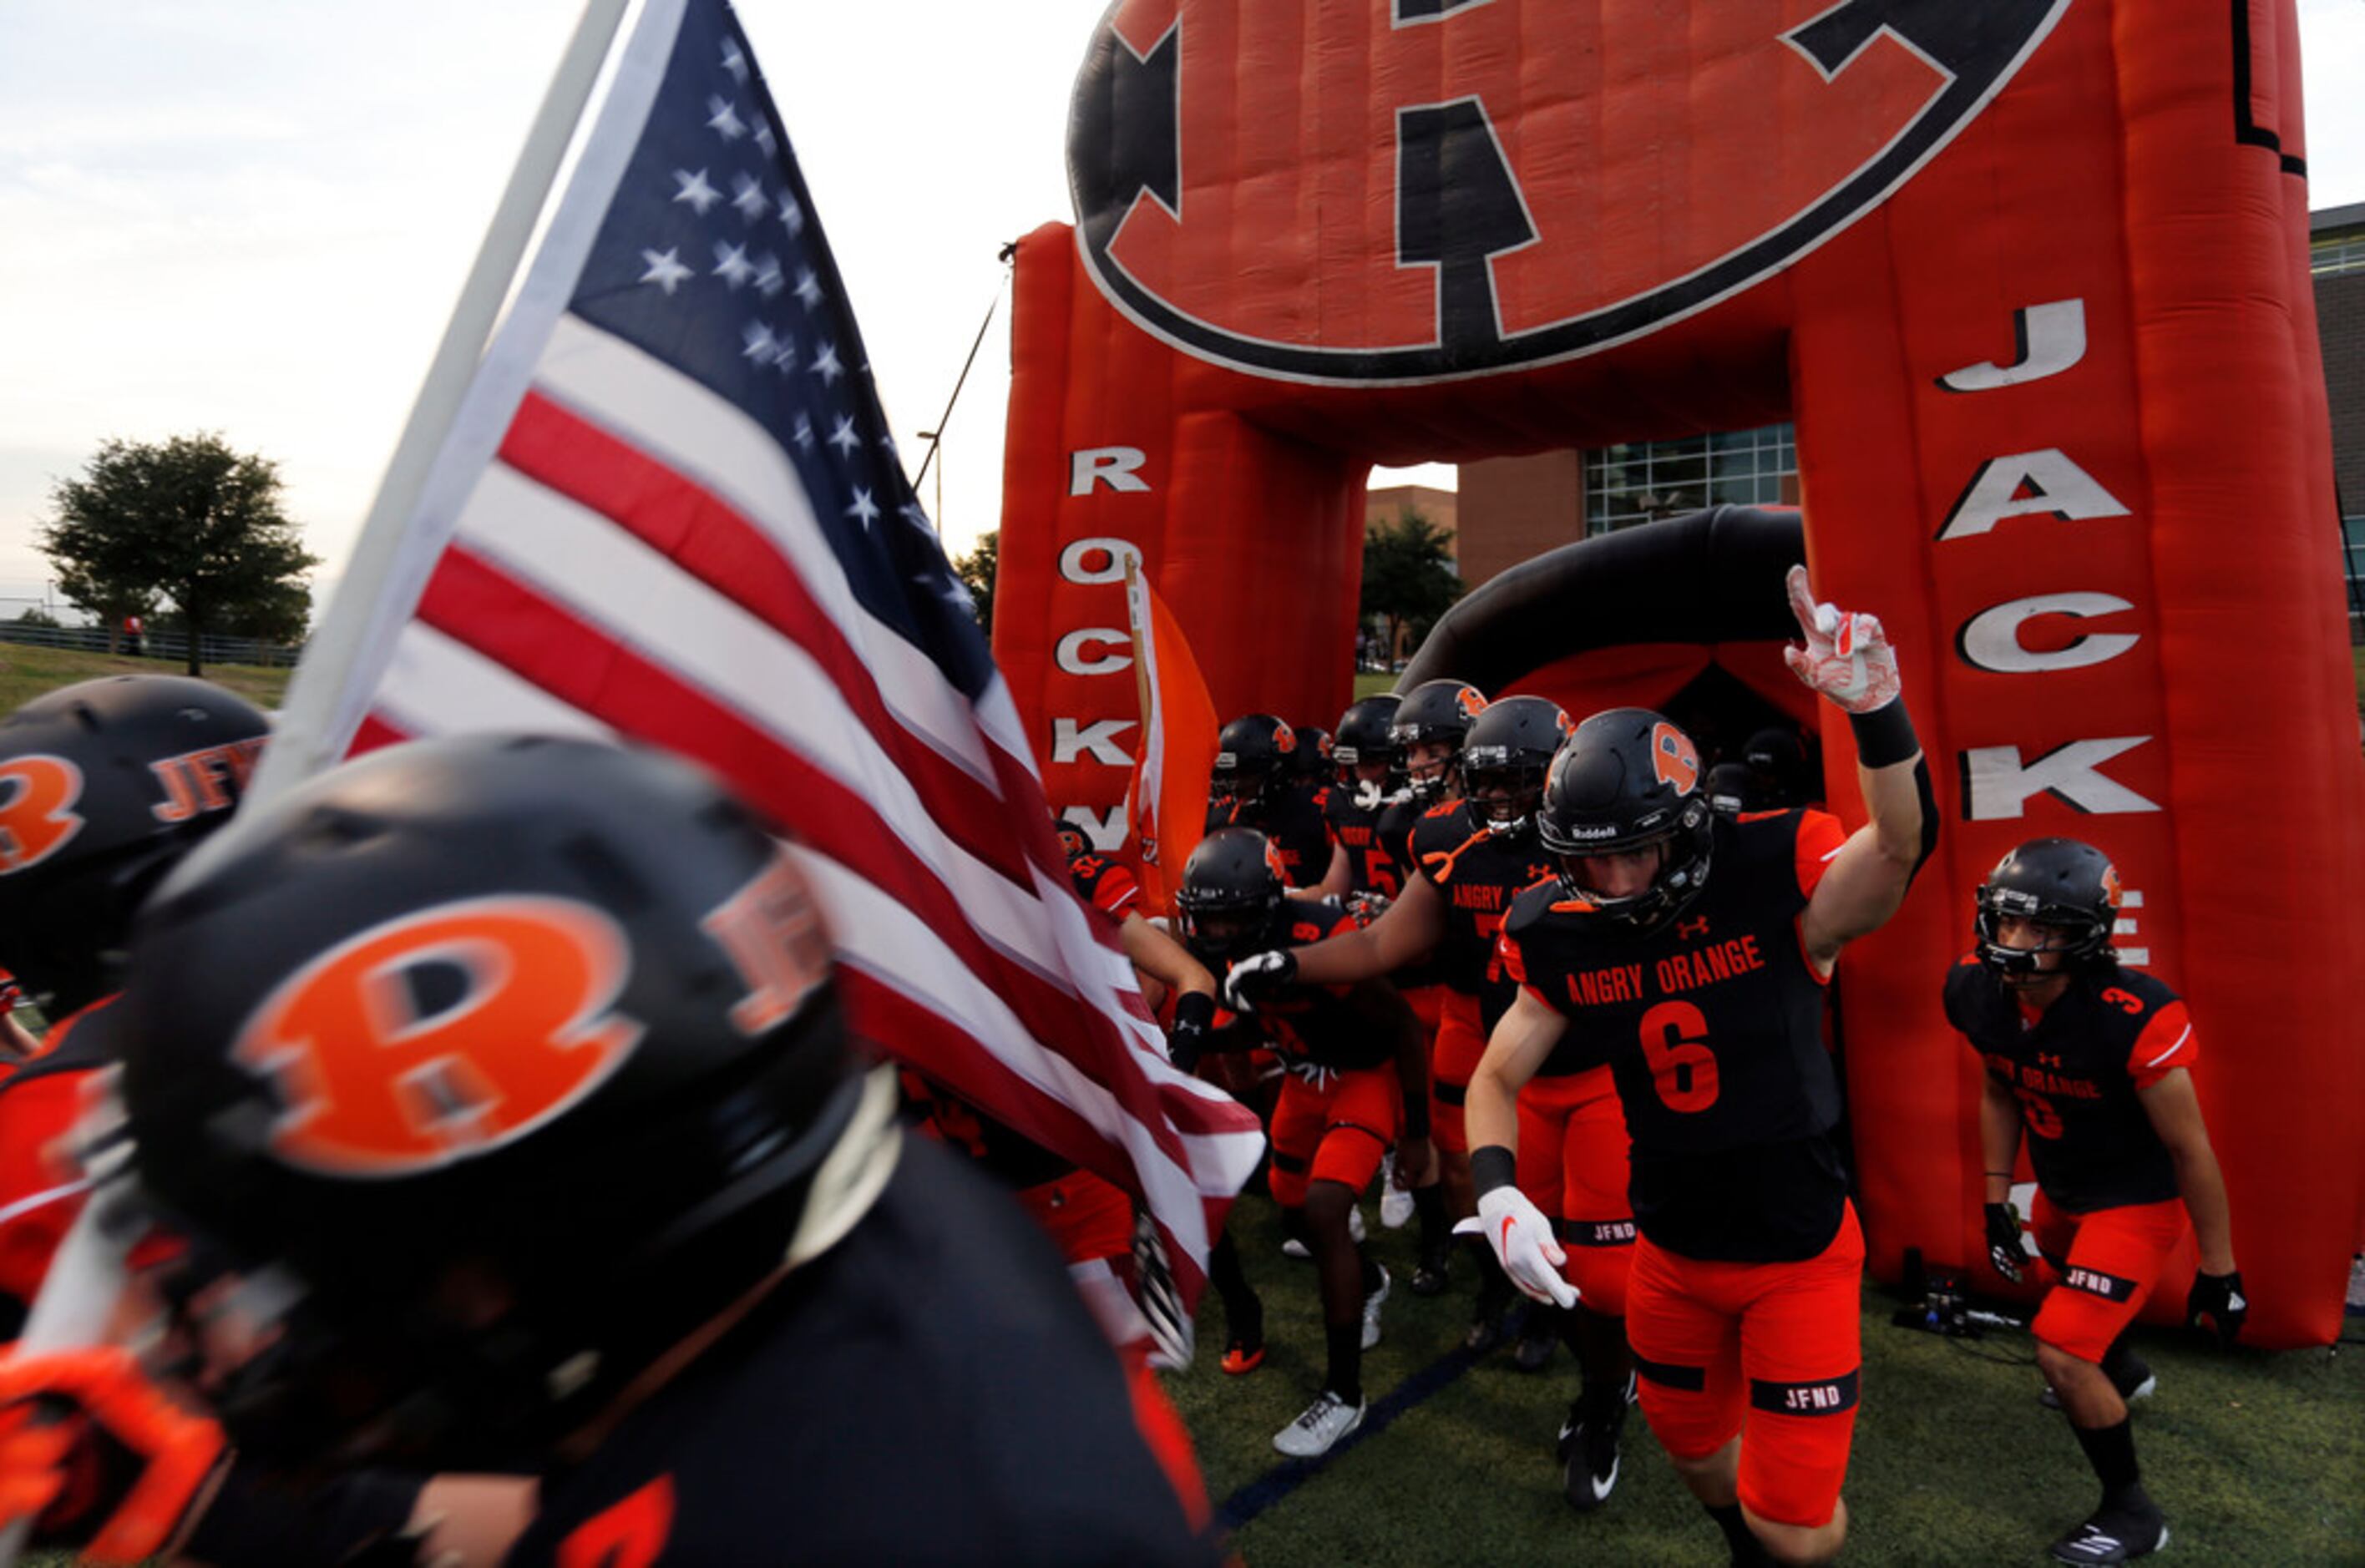 The Rockwall Yellowjackets enter the field before the start of a high school football game...